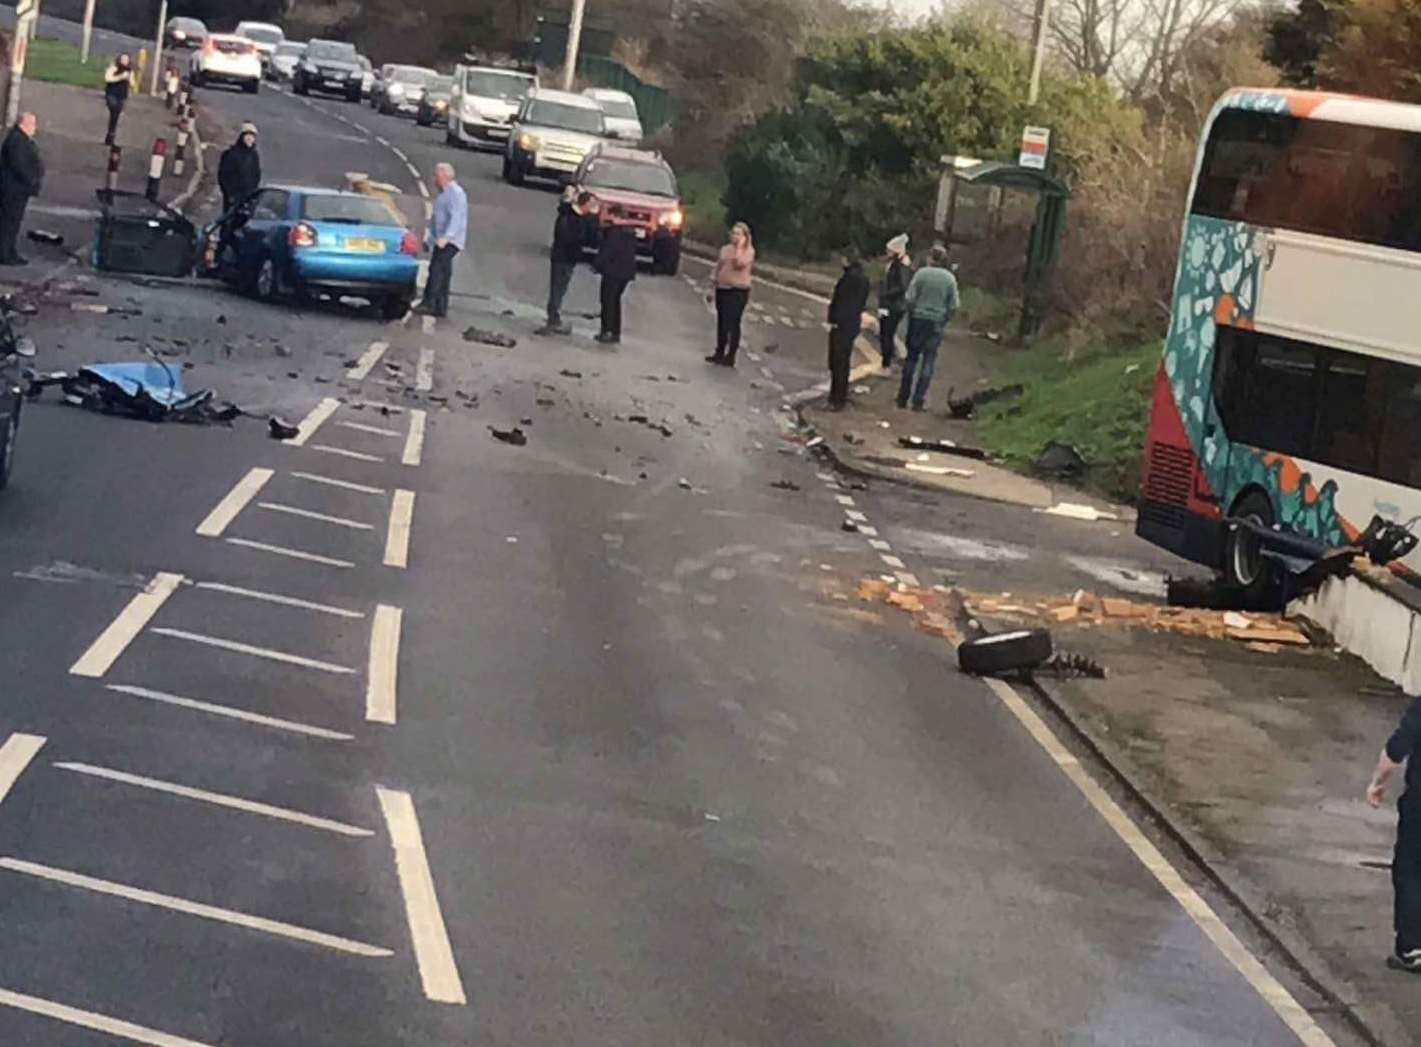 The aftermath of the bus crash. Picture: Matt Carr